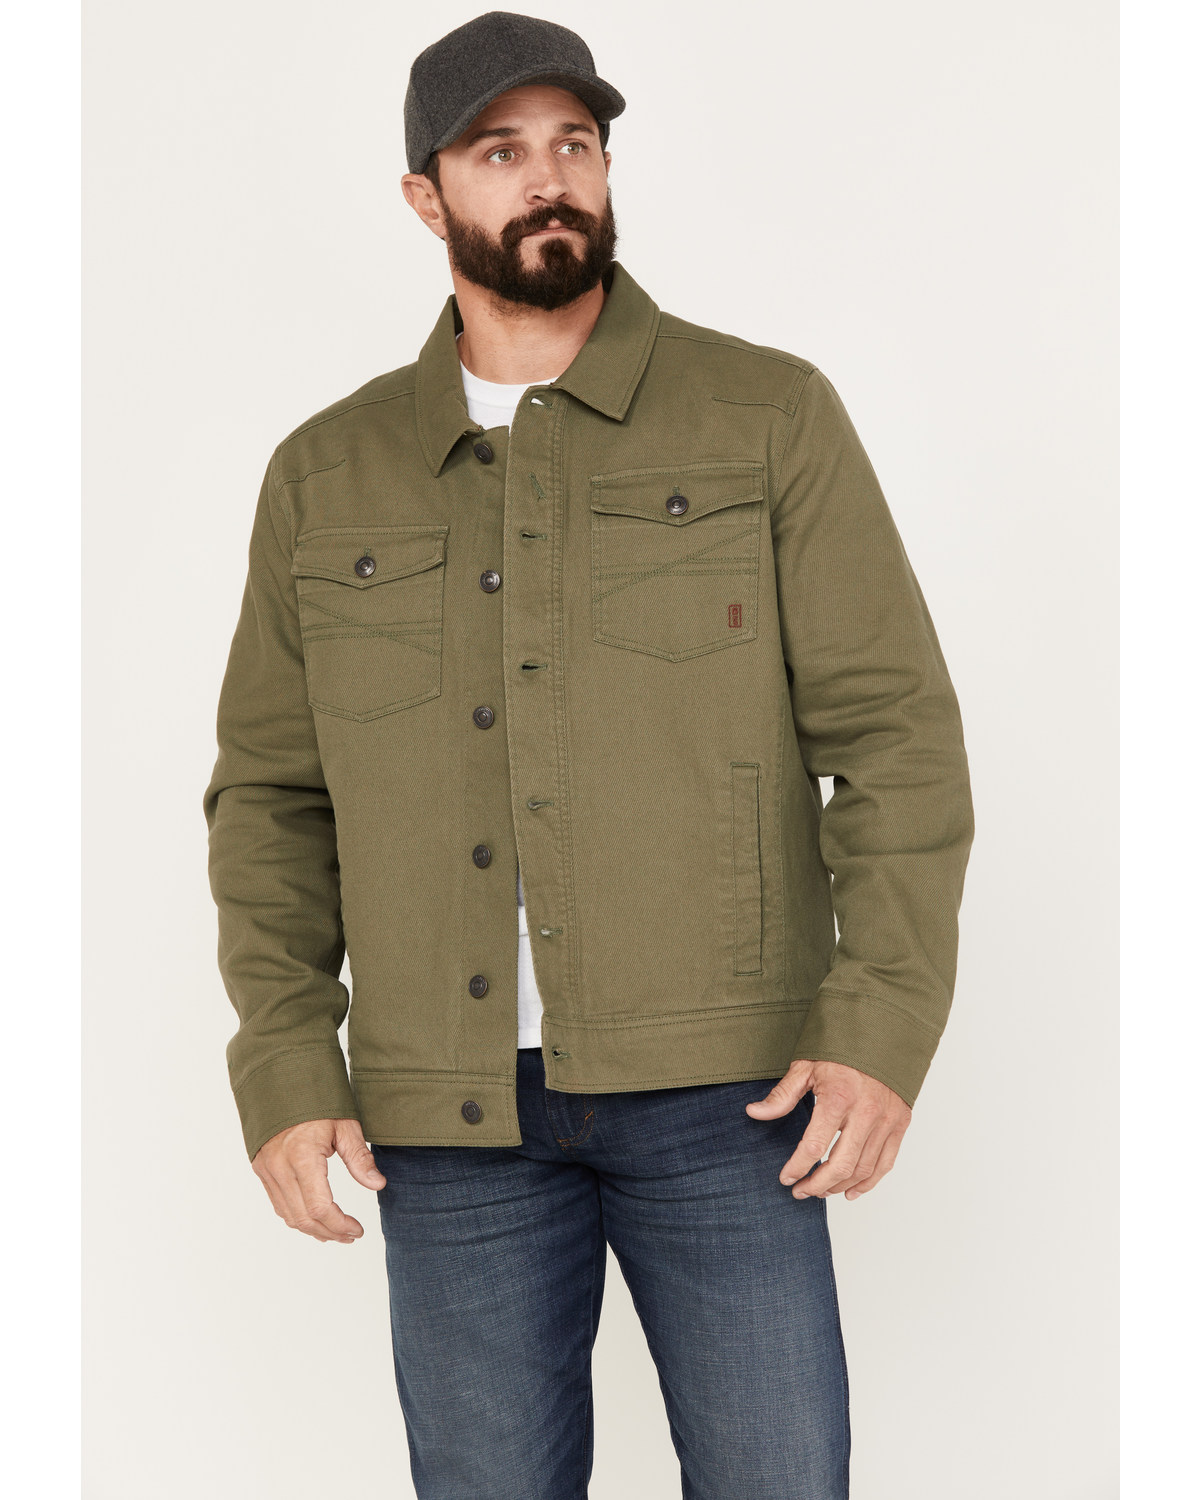 Brothers and Sons Men's Calvary Trucker Western Jacket